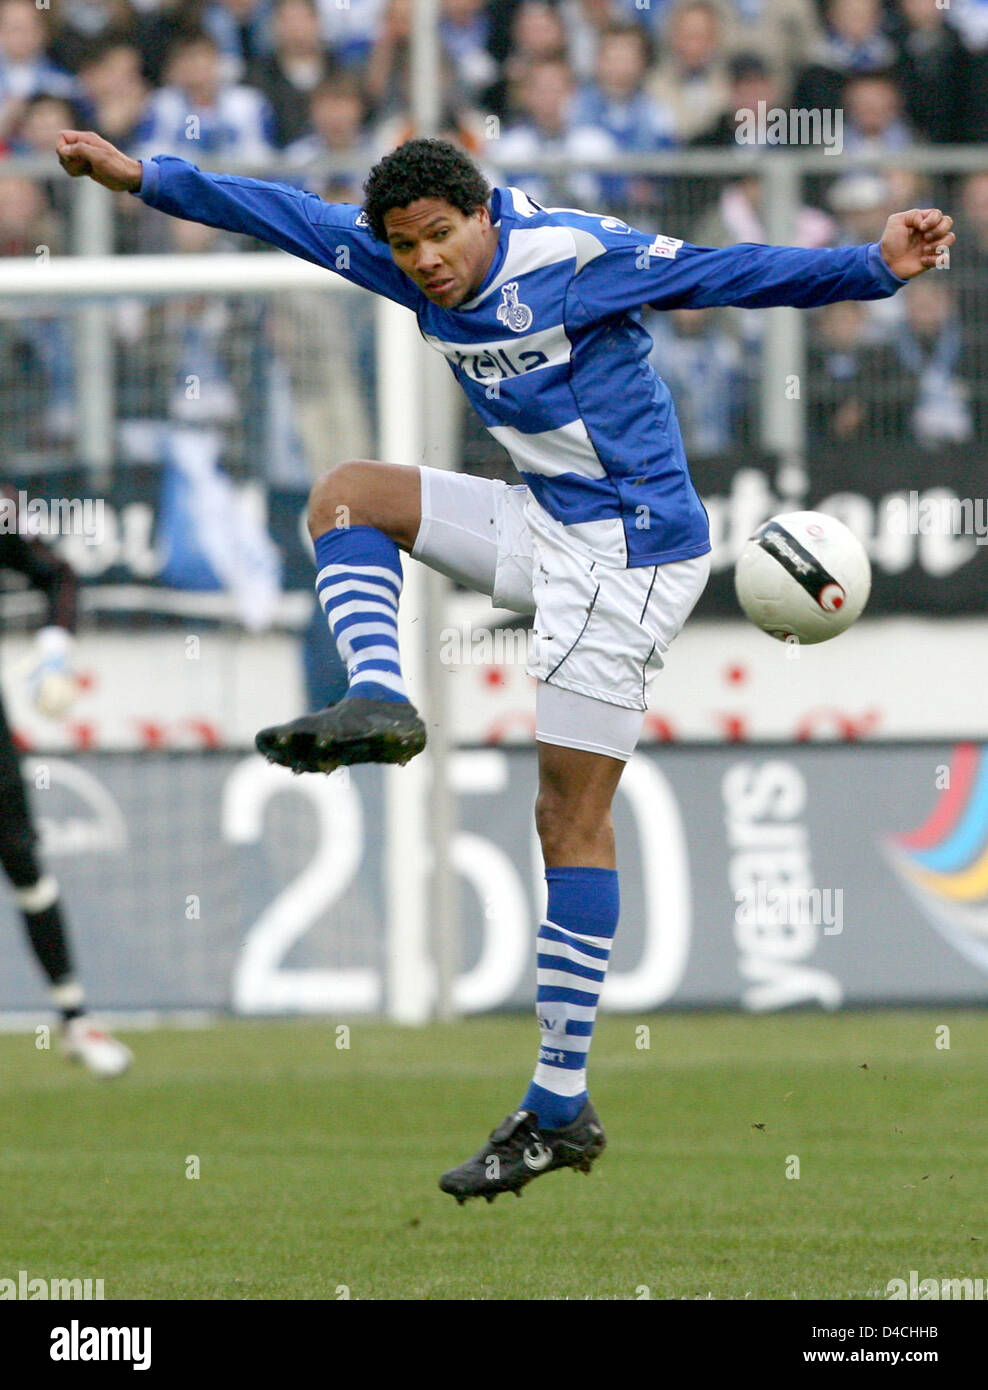 Duisburg's Michael Lamey (Netherlands) shown in action  during the Bundesliga tie MSV Duisburg vs Borussia Dortmund at MSV Arena in Duisburg, Germany, 2 February 2008. The match ended 3-3. Photo: Roland Weihrauch Stock Photo